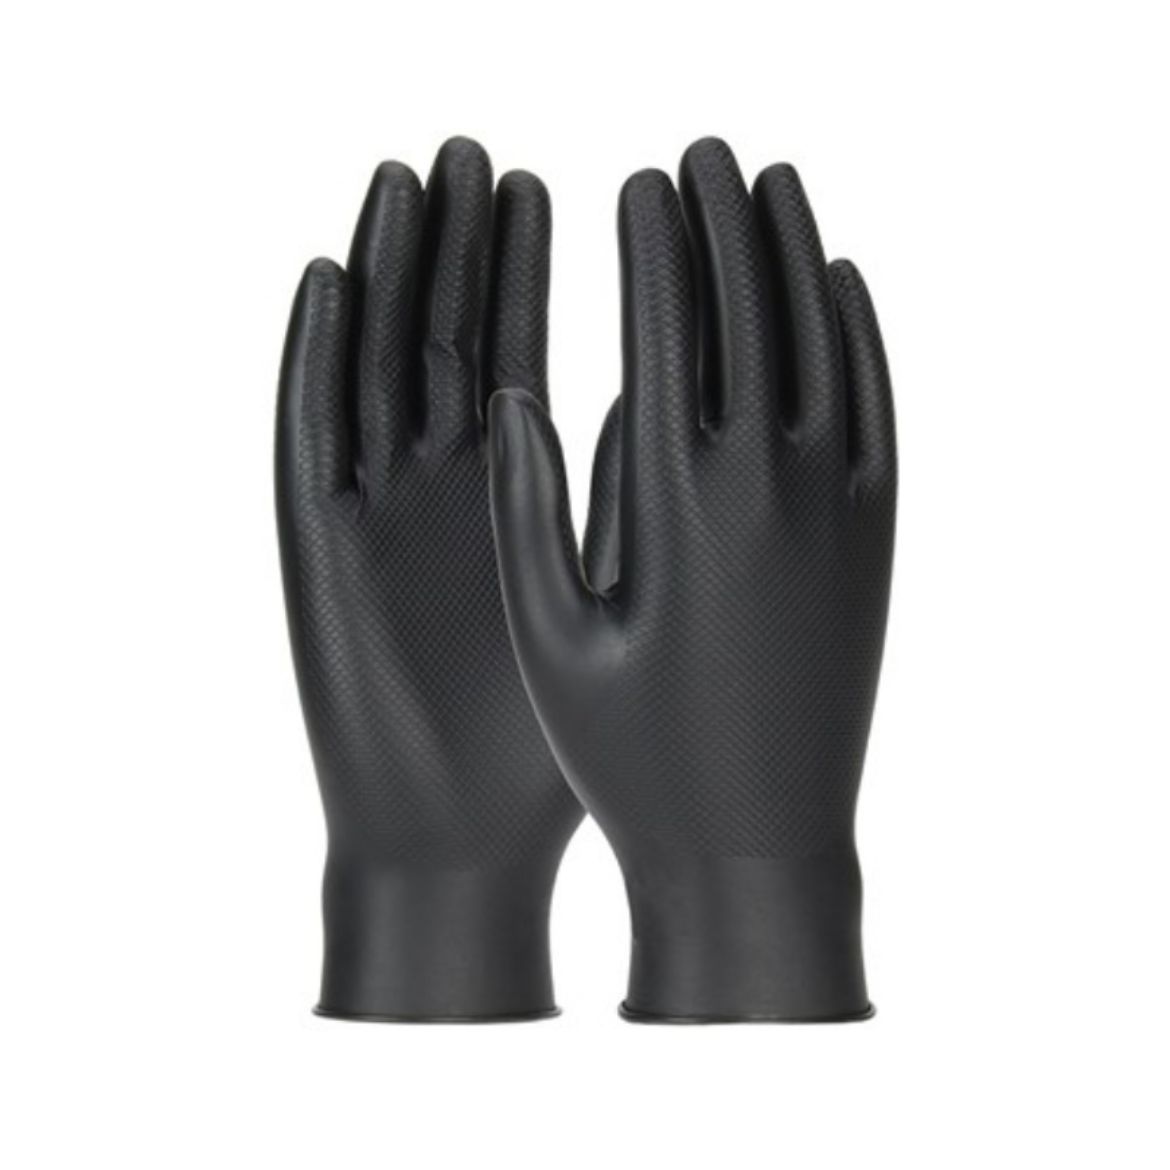 Picture of GRIPPAZ NON-SLIP BLACK DISPOSABLE NITRILE GLOVES. AVAILABLE IN SIZES S/M/L/XL/2XL